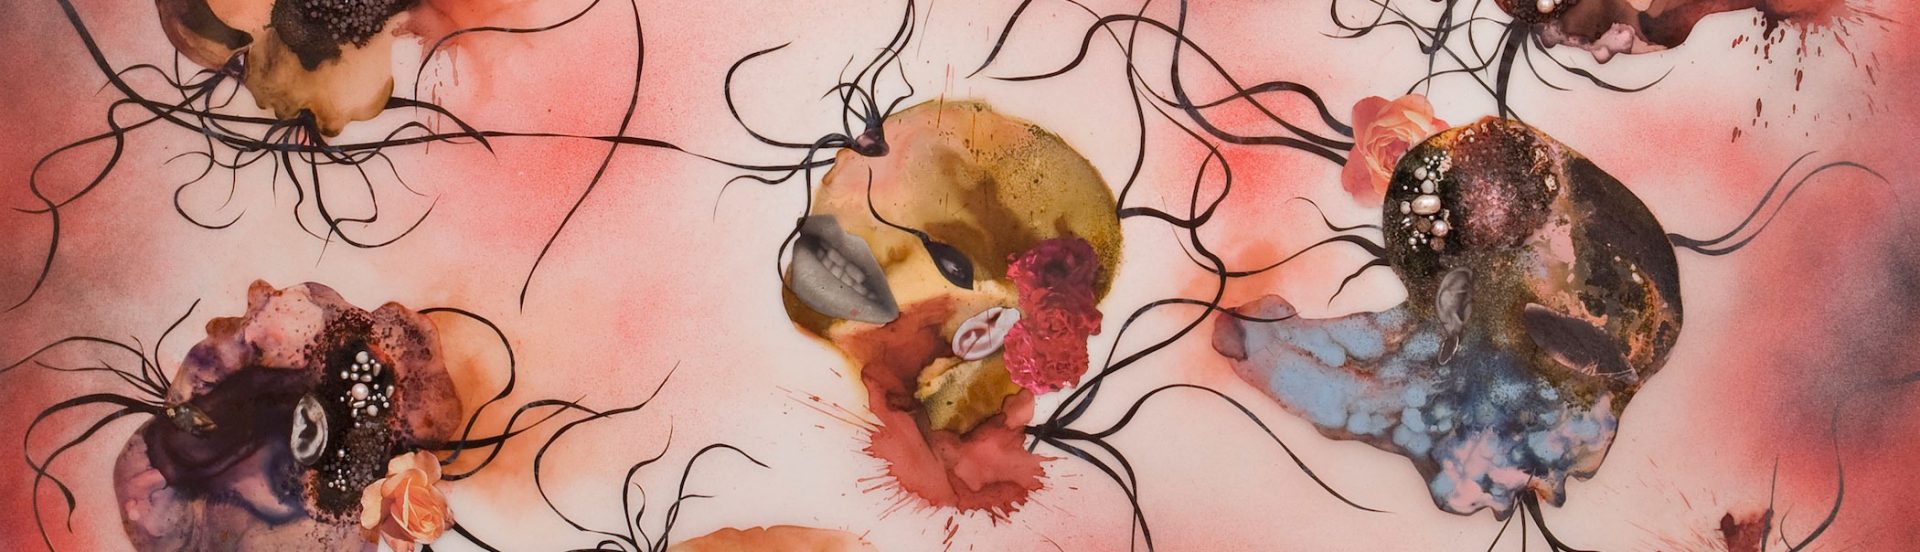 This major solo exhibition of work by Wangechi Mutu brings together nearly one hundred sculptures, paintings, collages, drawings, and films.
